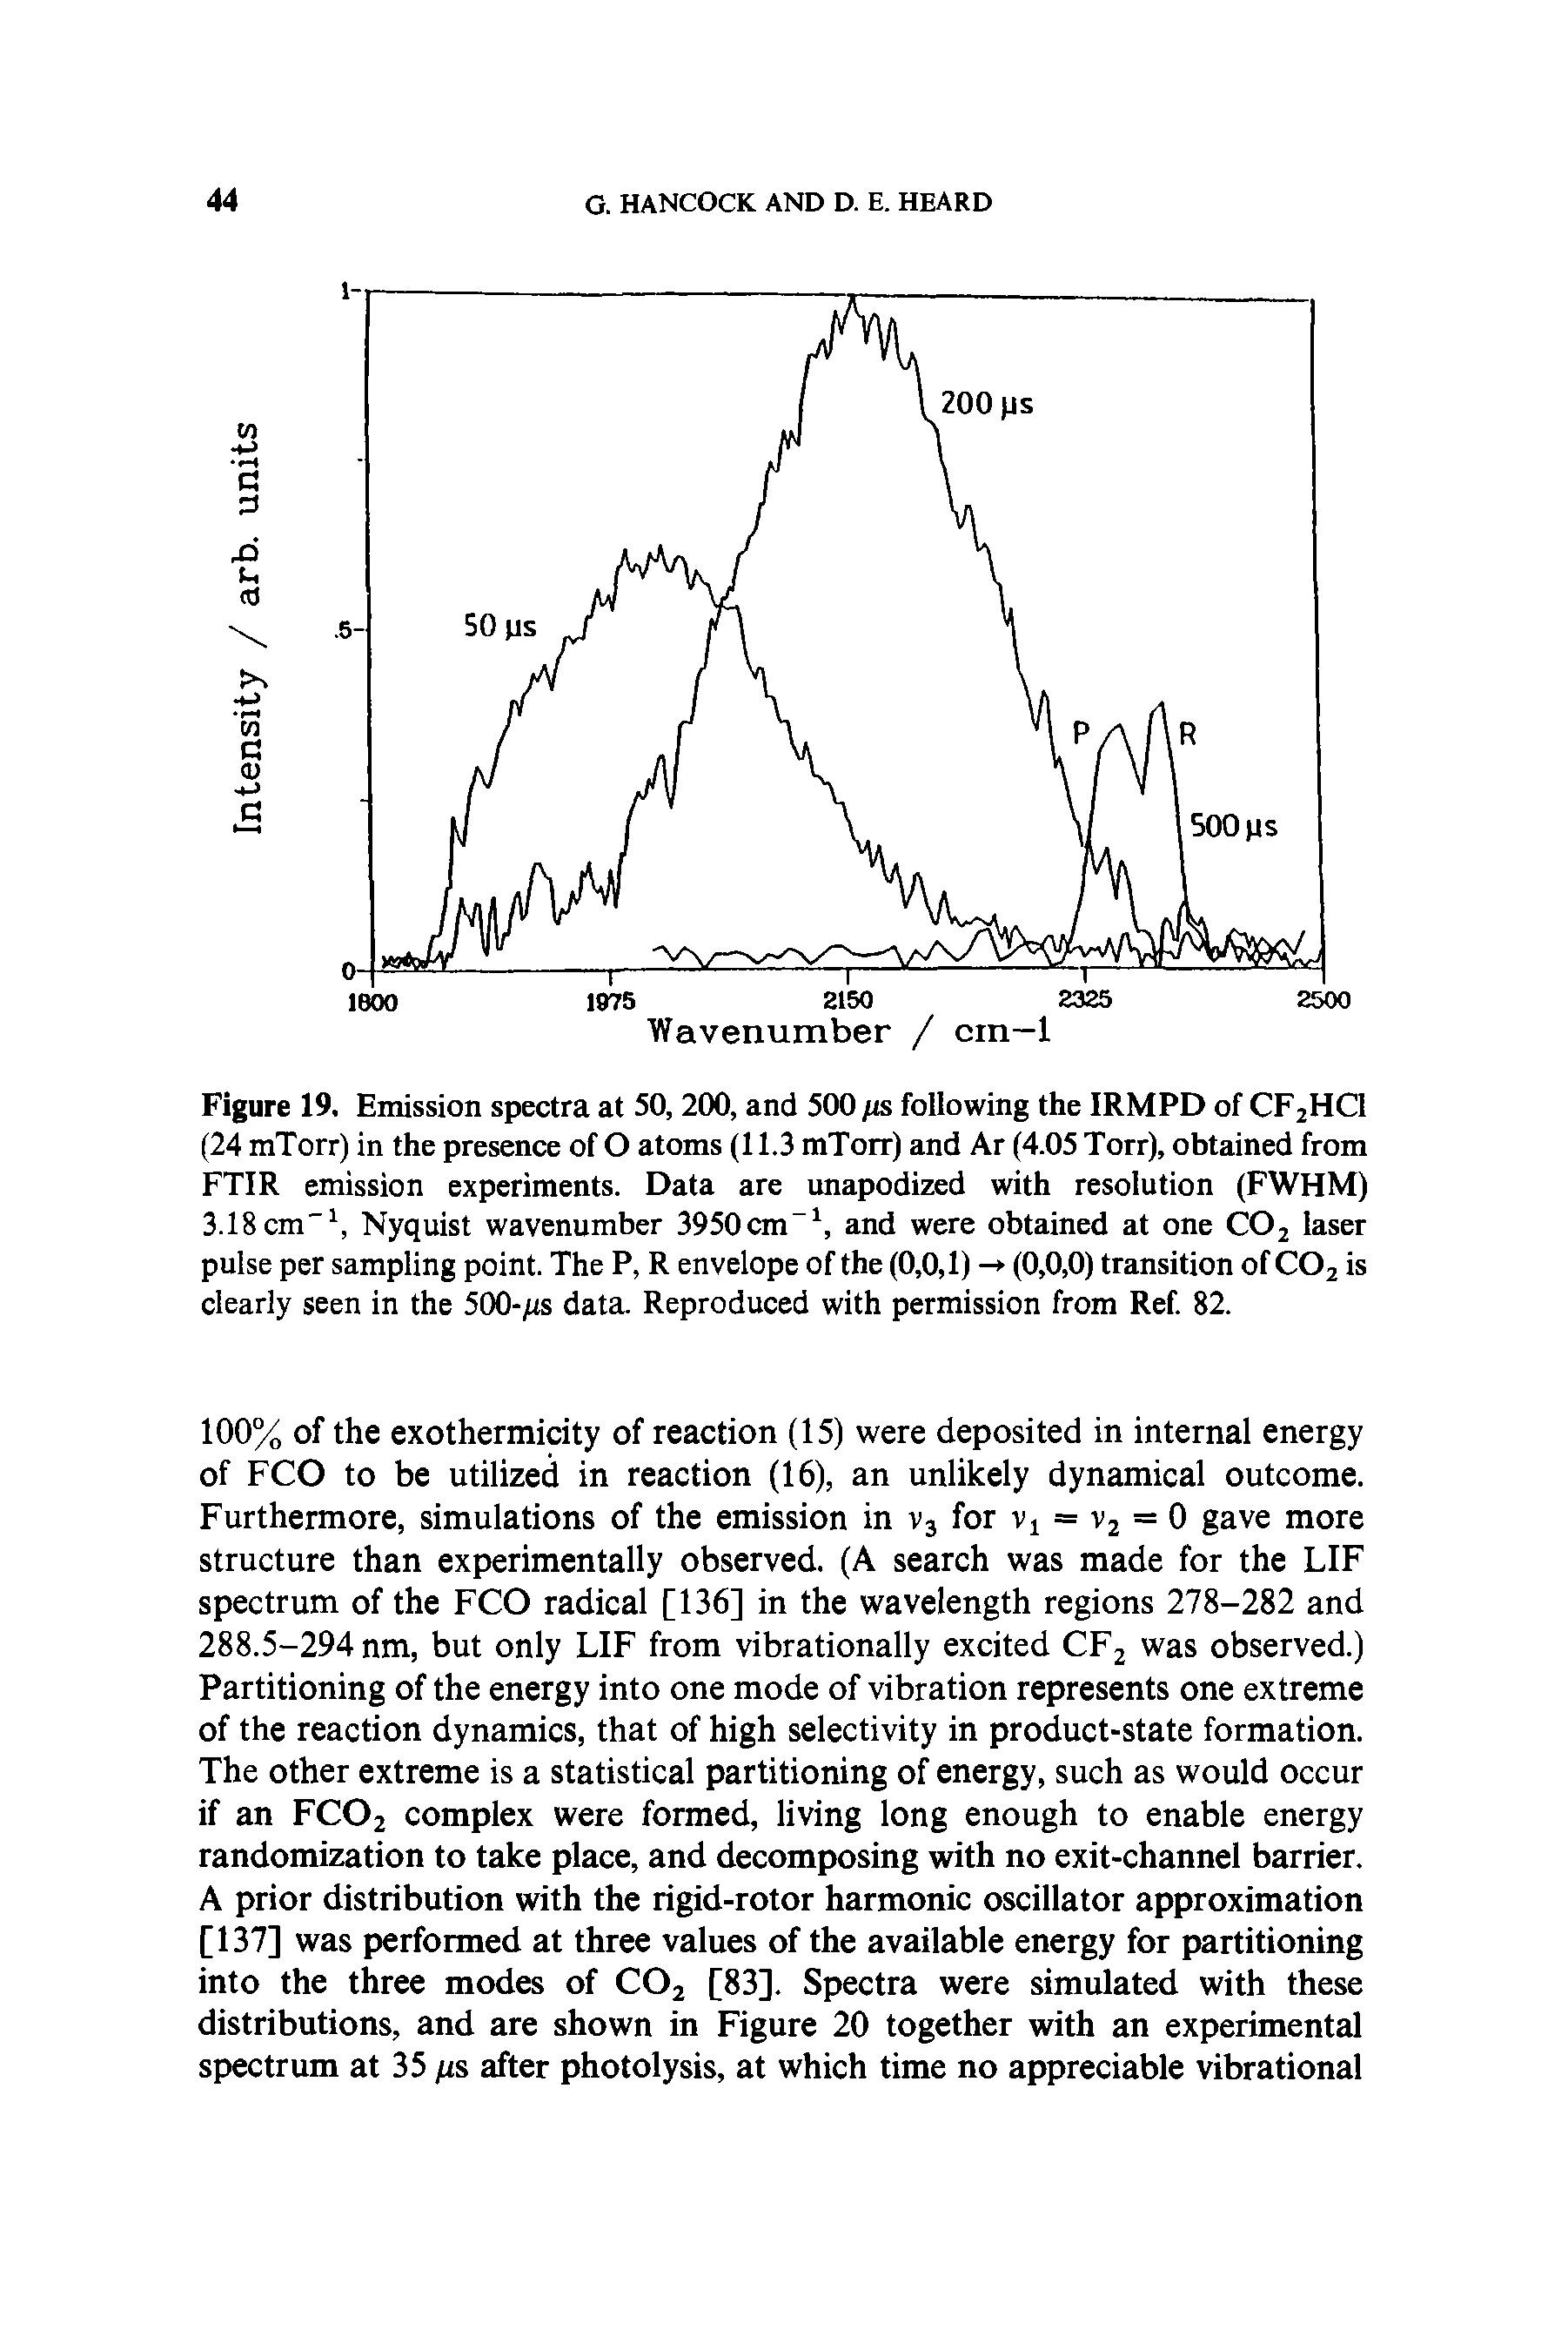 Figure 19, Emission spectra at 50, 200, and 500 fts following the IRMPD of CF2HC1 (24 mTorr) in the presence of O atoms (11.3 mTorr) and Ar (4.05 Torr), obtained from FTIR emission experiments. Data are unapodized with resolution (FWHM) 3.18cm 1, Nyquist wavenumber 3950cm-1, and were obtained at one C02 laser pulse per sampling point. The P, R envelope of the (0,0,1) - (0,0,0) transition of COz is clearly seen in the 500-/JS data. Reproduced with permission from Ref. 82.